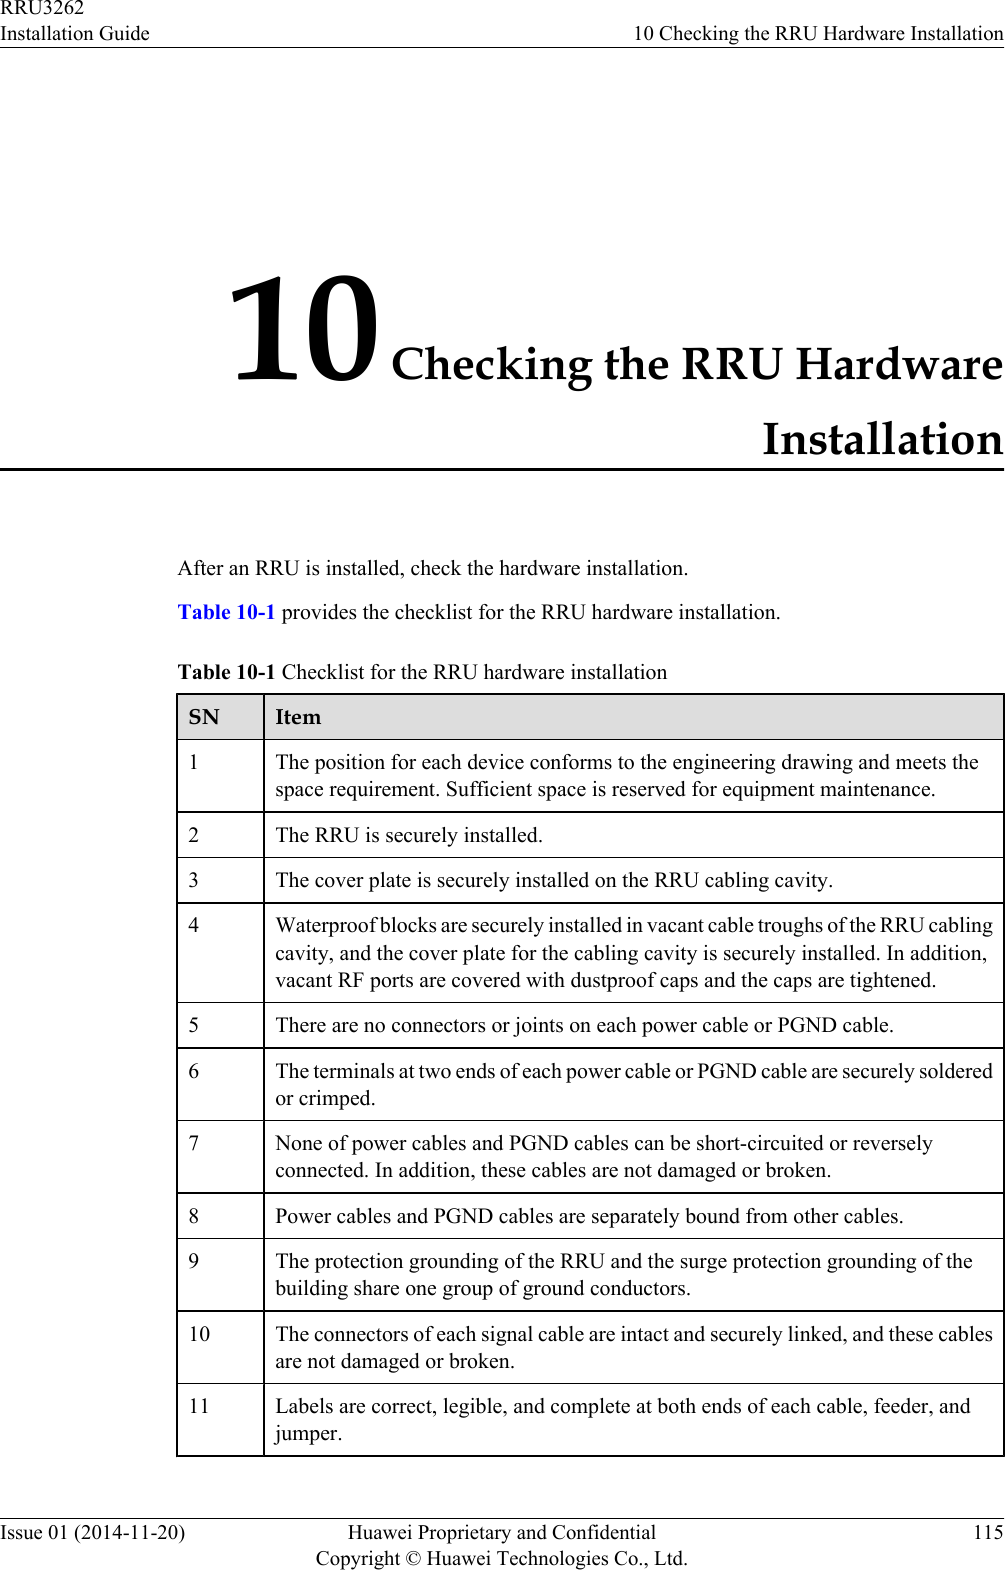 10 Checking the RRU HardwareInstallationAfter an RRU is installed, check the hardware installation.Table 10-1 provides the checklist for the RRU hardware installation.Table 10-1 Checklist for the RRU hardware installationSN Item1The position for each device conforms to the engineering drawing and meets thespace requirement. Sufficient space is reserved for equipment maintenance.2 The RRU is securely installed.3 The cover plate is securely installed on the RRU cabling cavity.4 Waterproof blocks are securely installed in vacant cable troughs of the RRU cablingcavity, and the cover plate for the cabling cavity is securely installed. In addition,vacant RF ports are covered with dustproof caps and the caps are tightened.5 There are no connectors or joints on each power cable or PGND cable.6 The terminals at two ends of each power cable or PGND cable are securely solderedor crimped.7 None of power cables and PGND cables can be short-circuited or reverselyconnected. In addition, these cables are not damaged or broken.8 Power cables and PGND cables are separately bound from other cables.9 The protection grounding of the RRU and the surge protection grounding of thebuilding share one group of ground conductors.10 The connectors of each signal cable are intact and securely linked, and these cablesare not damaged or broken.11 Labels are correct, legible, and complete at both ends of each cable, feeder, andjumper.RRU3262Installation Guide 10 Checking the RRU Hardware InstallationIssue 01 (2014-11-20) Huawei Proprietary and ConfidentialCopyright © Huawei Technologies Co., Ltd.115